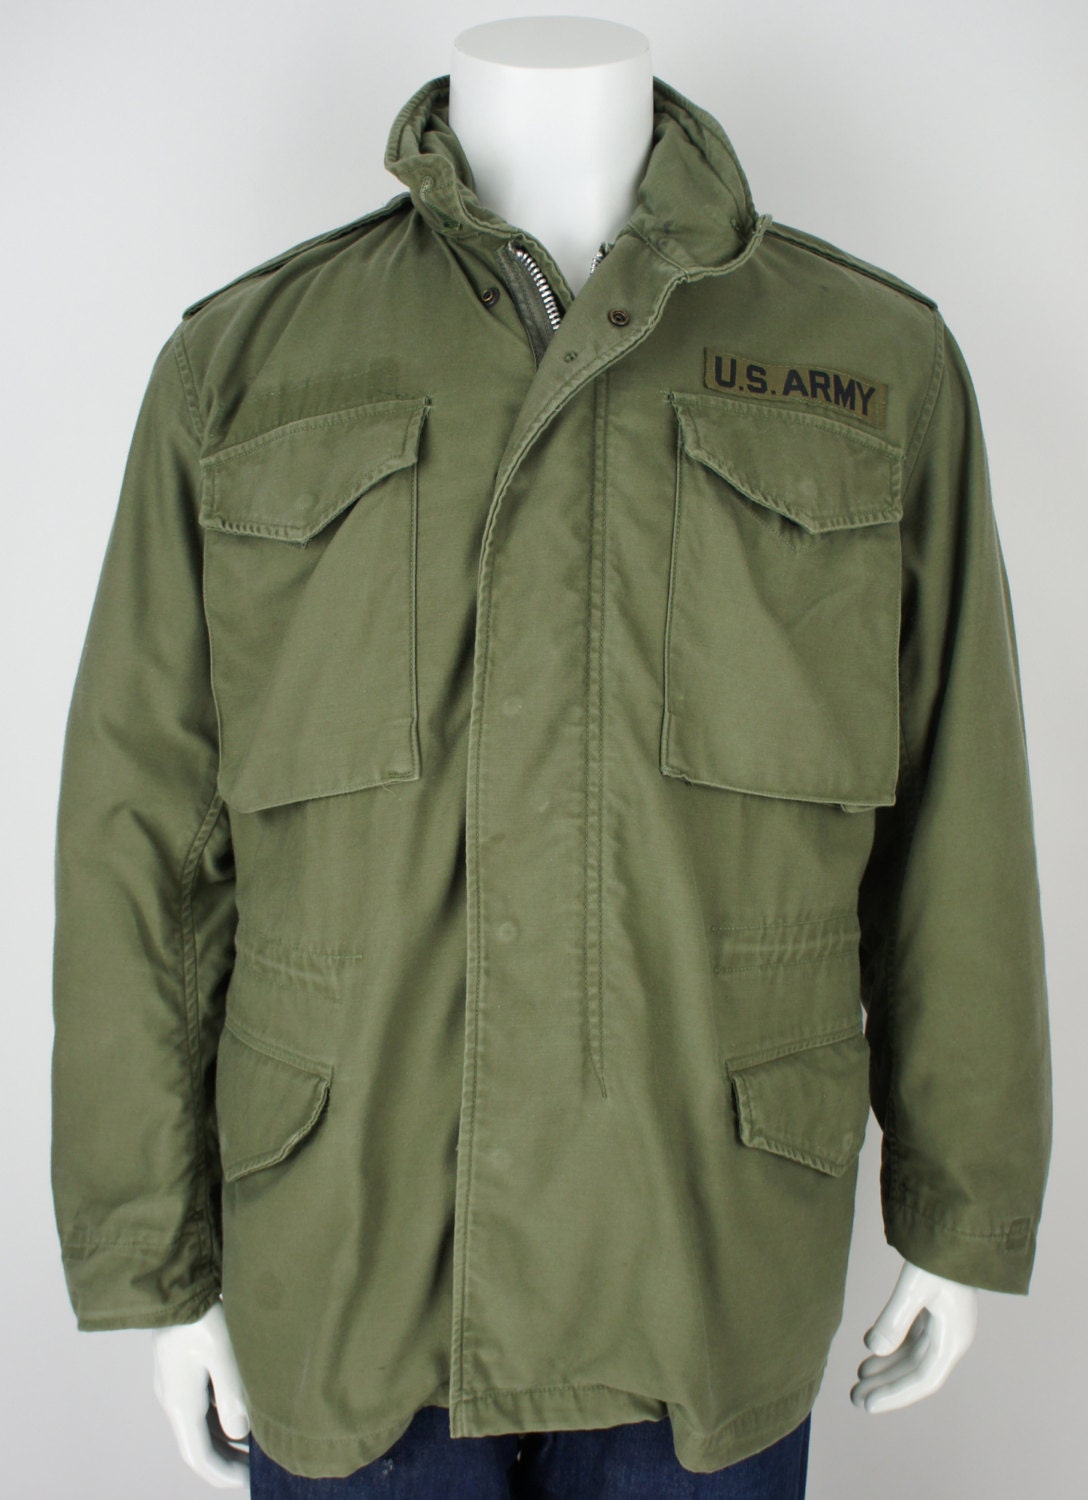 Vintage 1960's US Army M-65 Field Jacket size Small